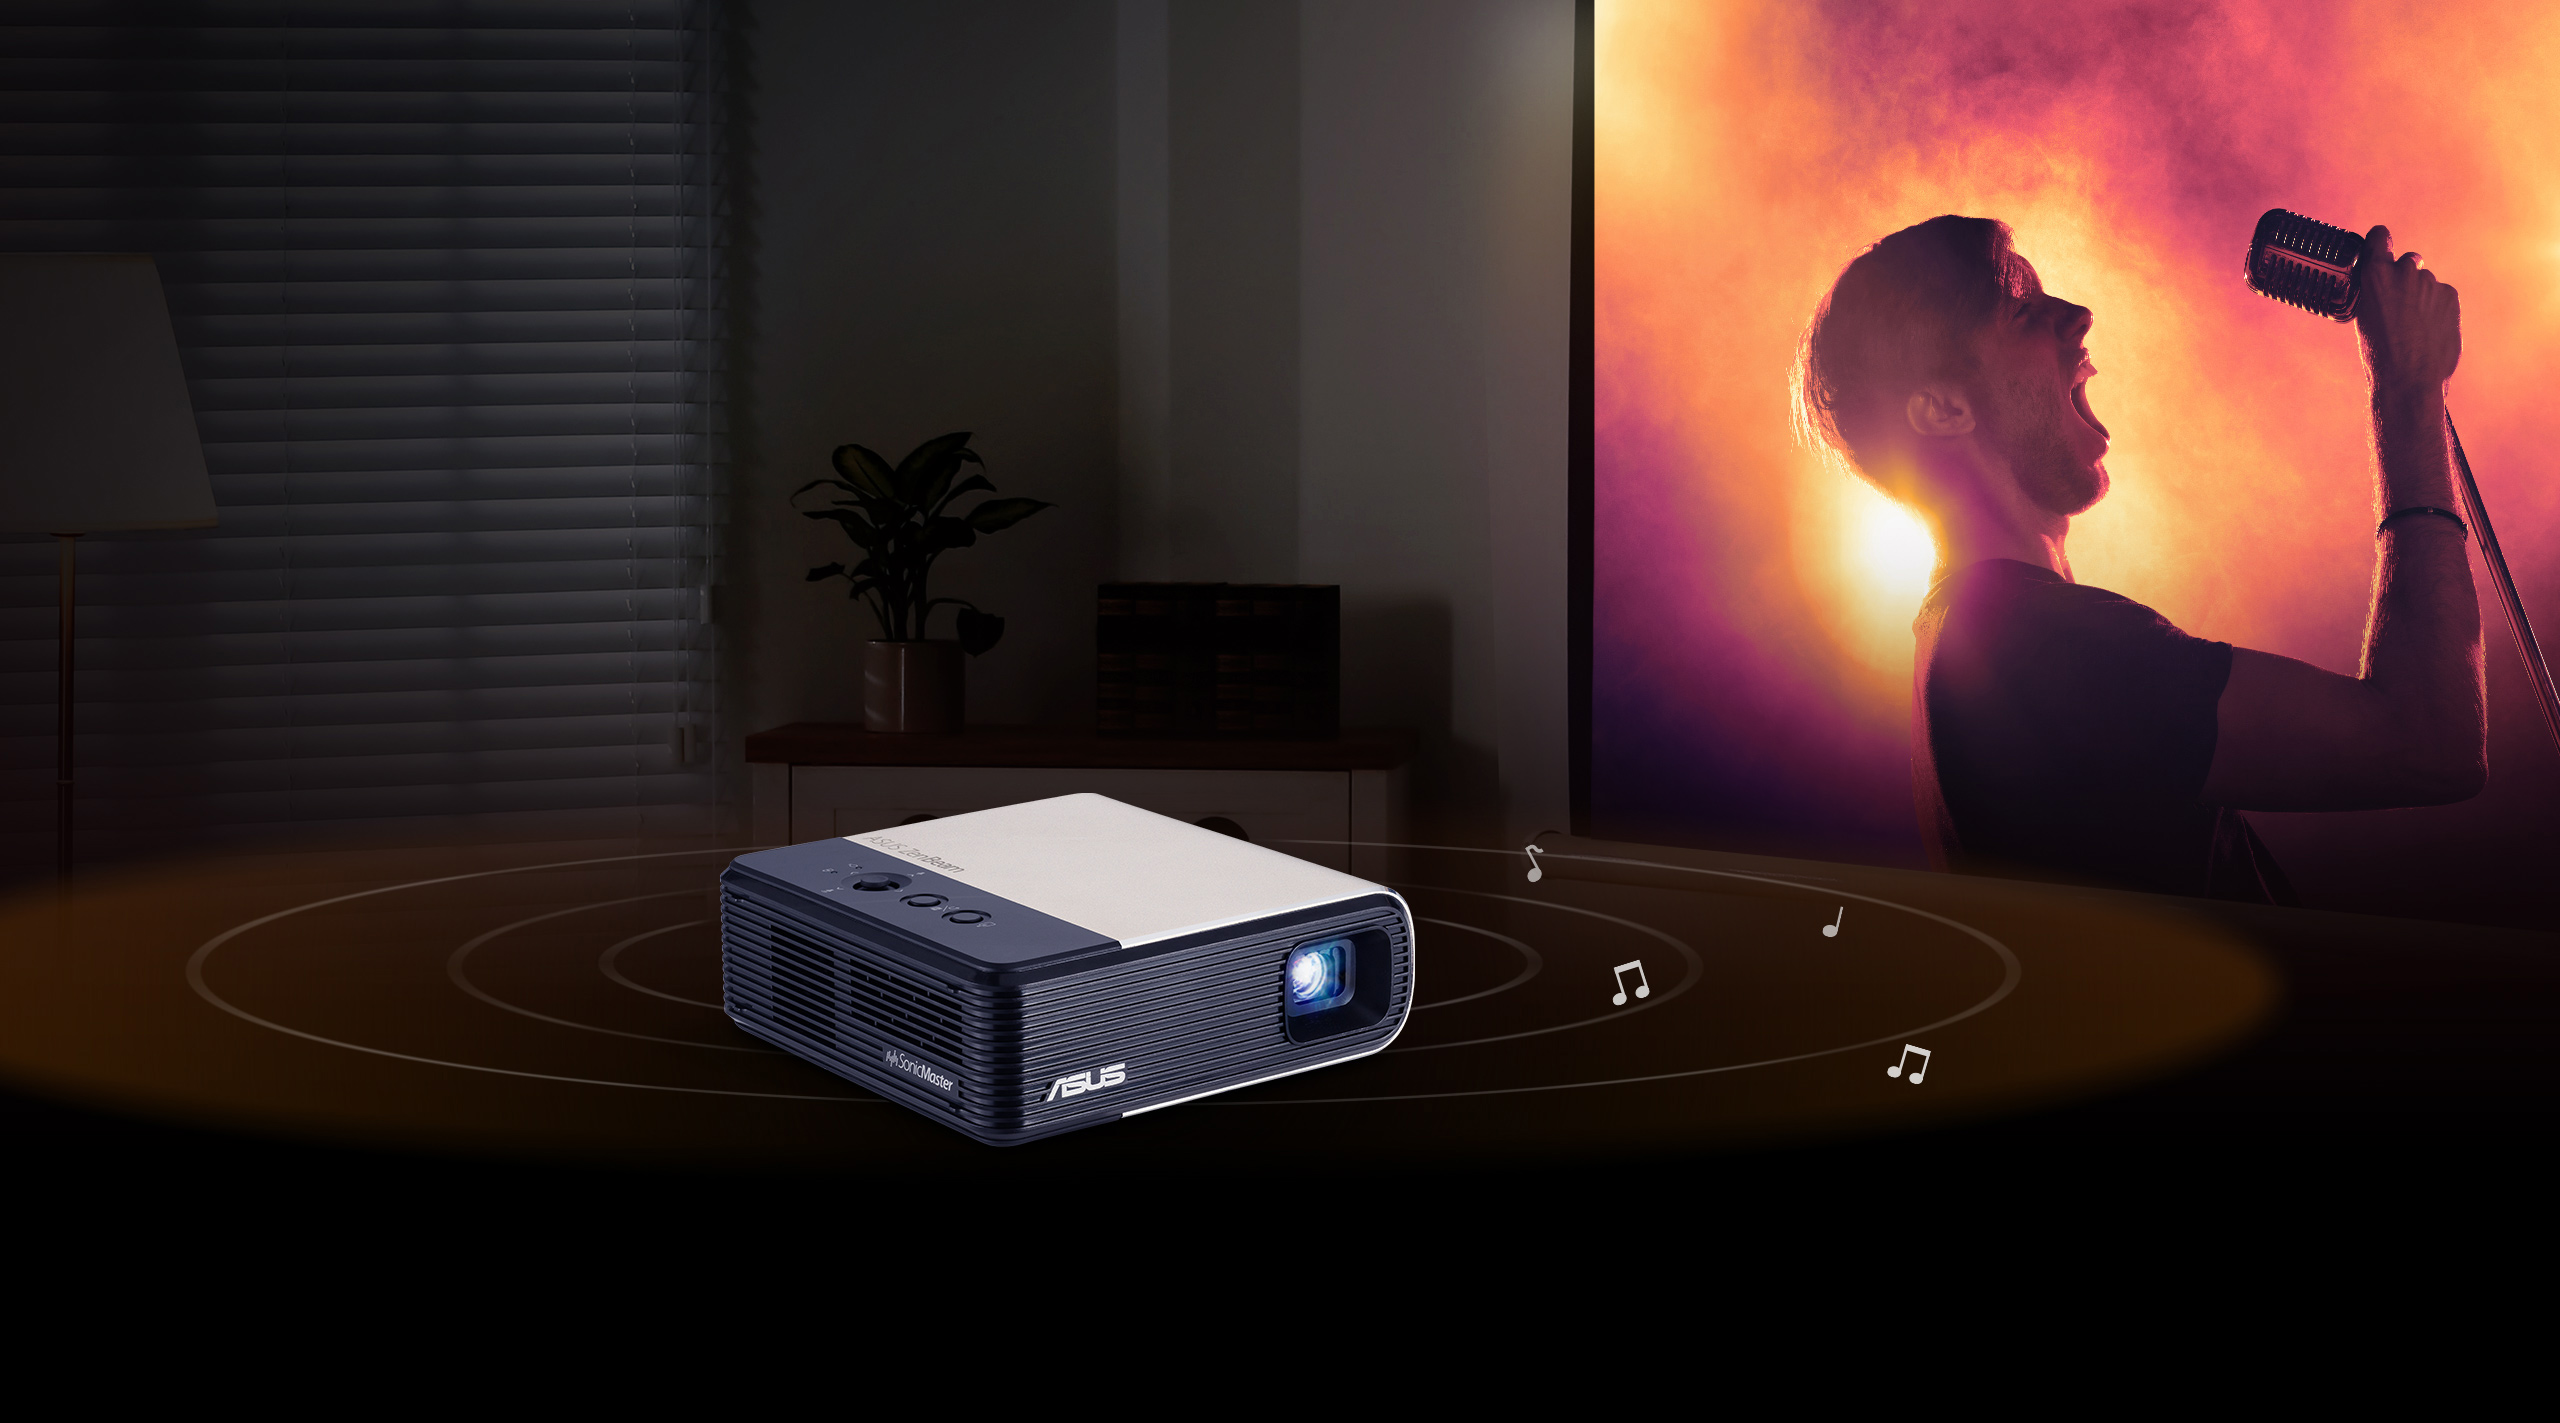 ASUS ZenBeam E2 includes a built-in 5-watt speaker with ASUS SonicMaster technology offers amazing audio